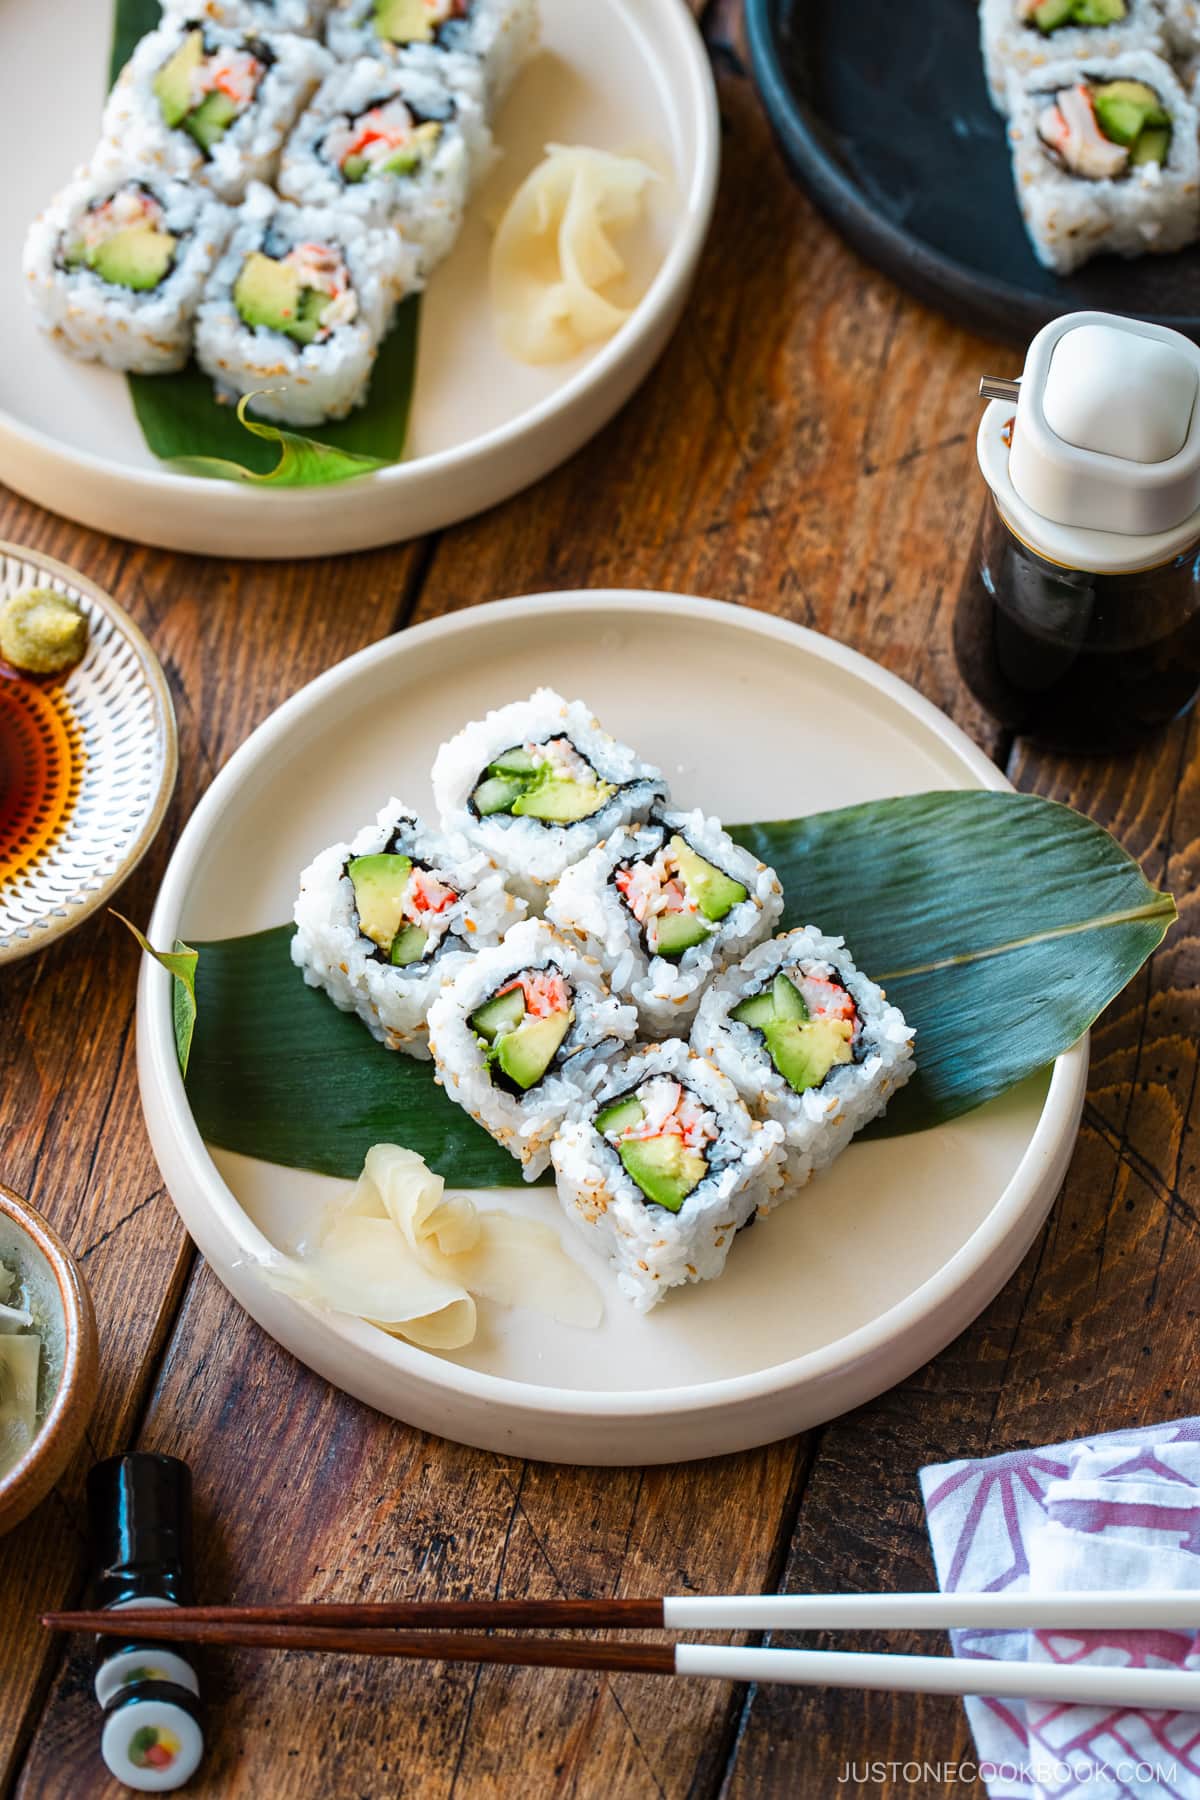 Round ceramic plates containing six pieces of California rolls over a bamboo leaf along with sushi ginger.